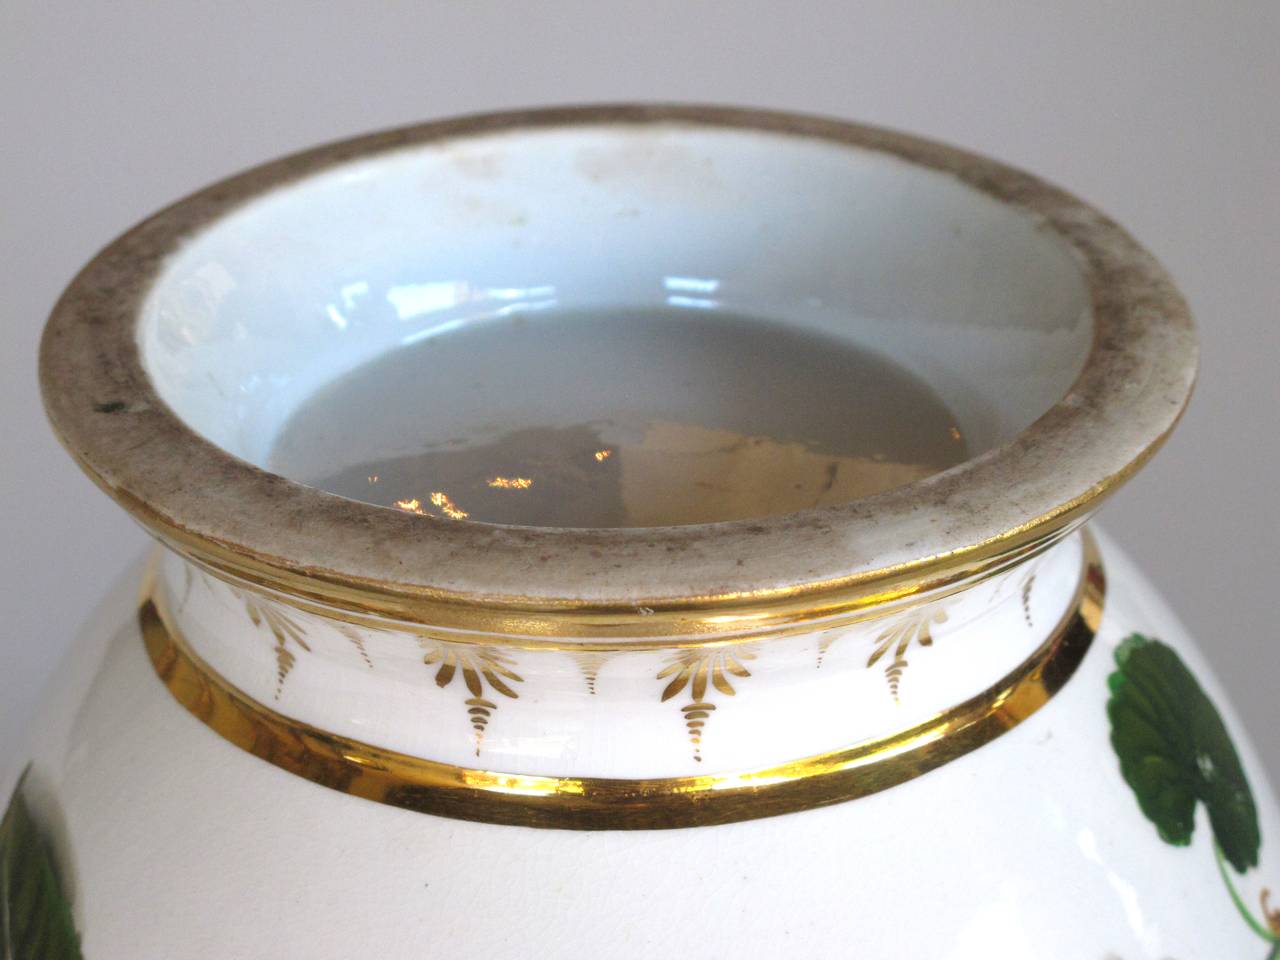 A good quality Paris porcelain polychromed double-handled cache pot or jardiniere; the cup-shaped bowl raised on a flared foot; with a hand-painted band of floral stems and fruit with gilt highlights.